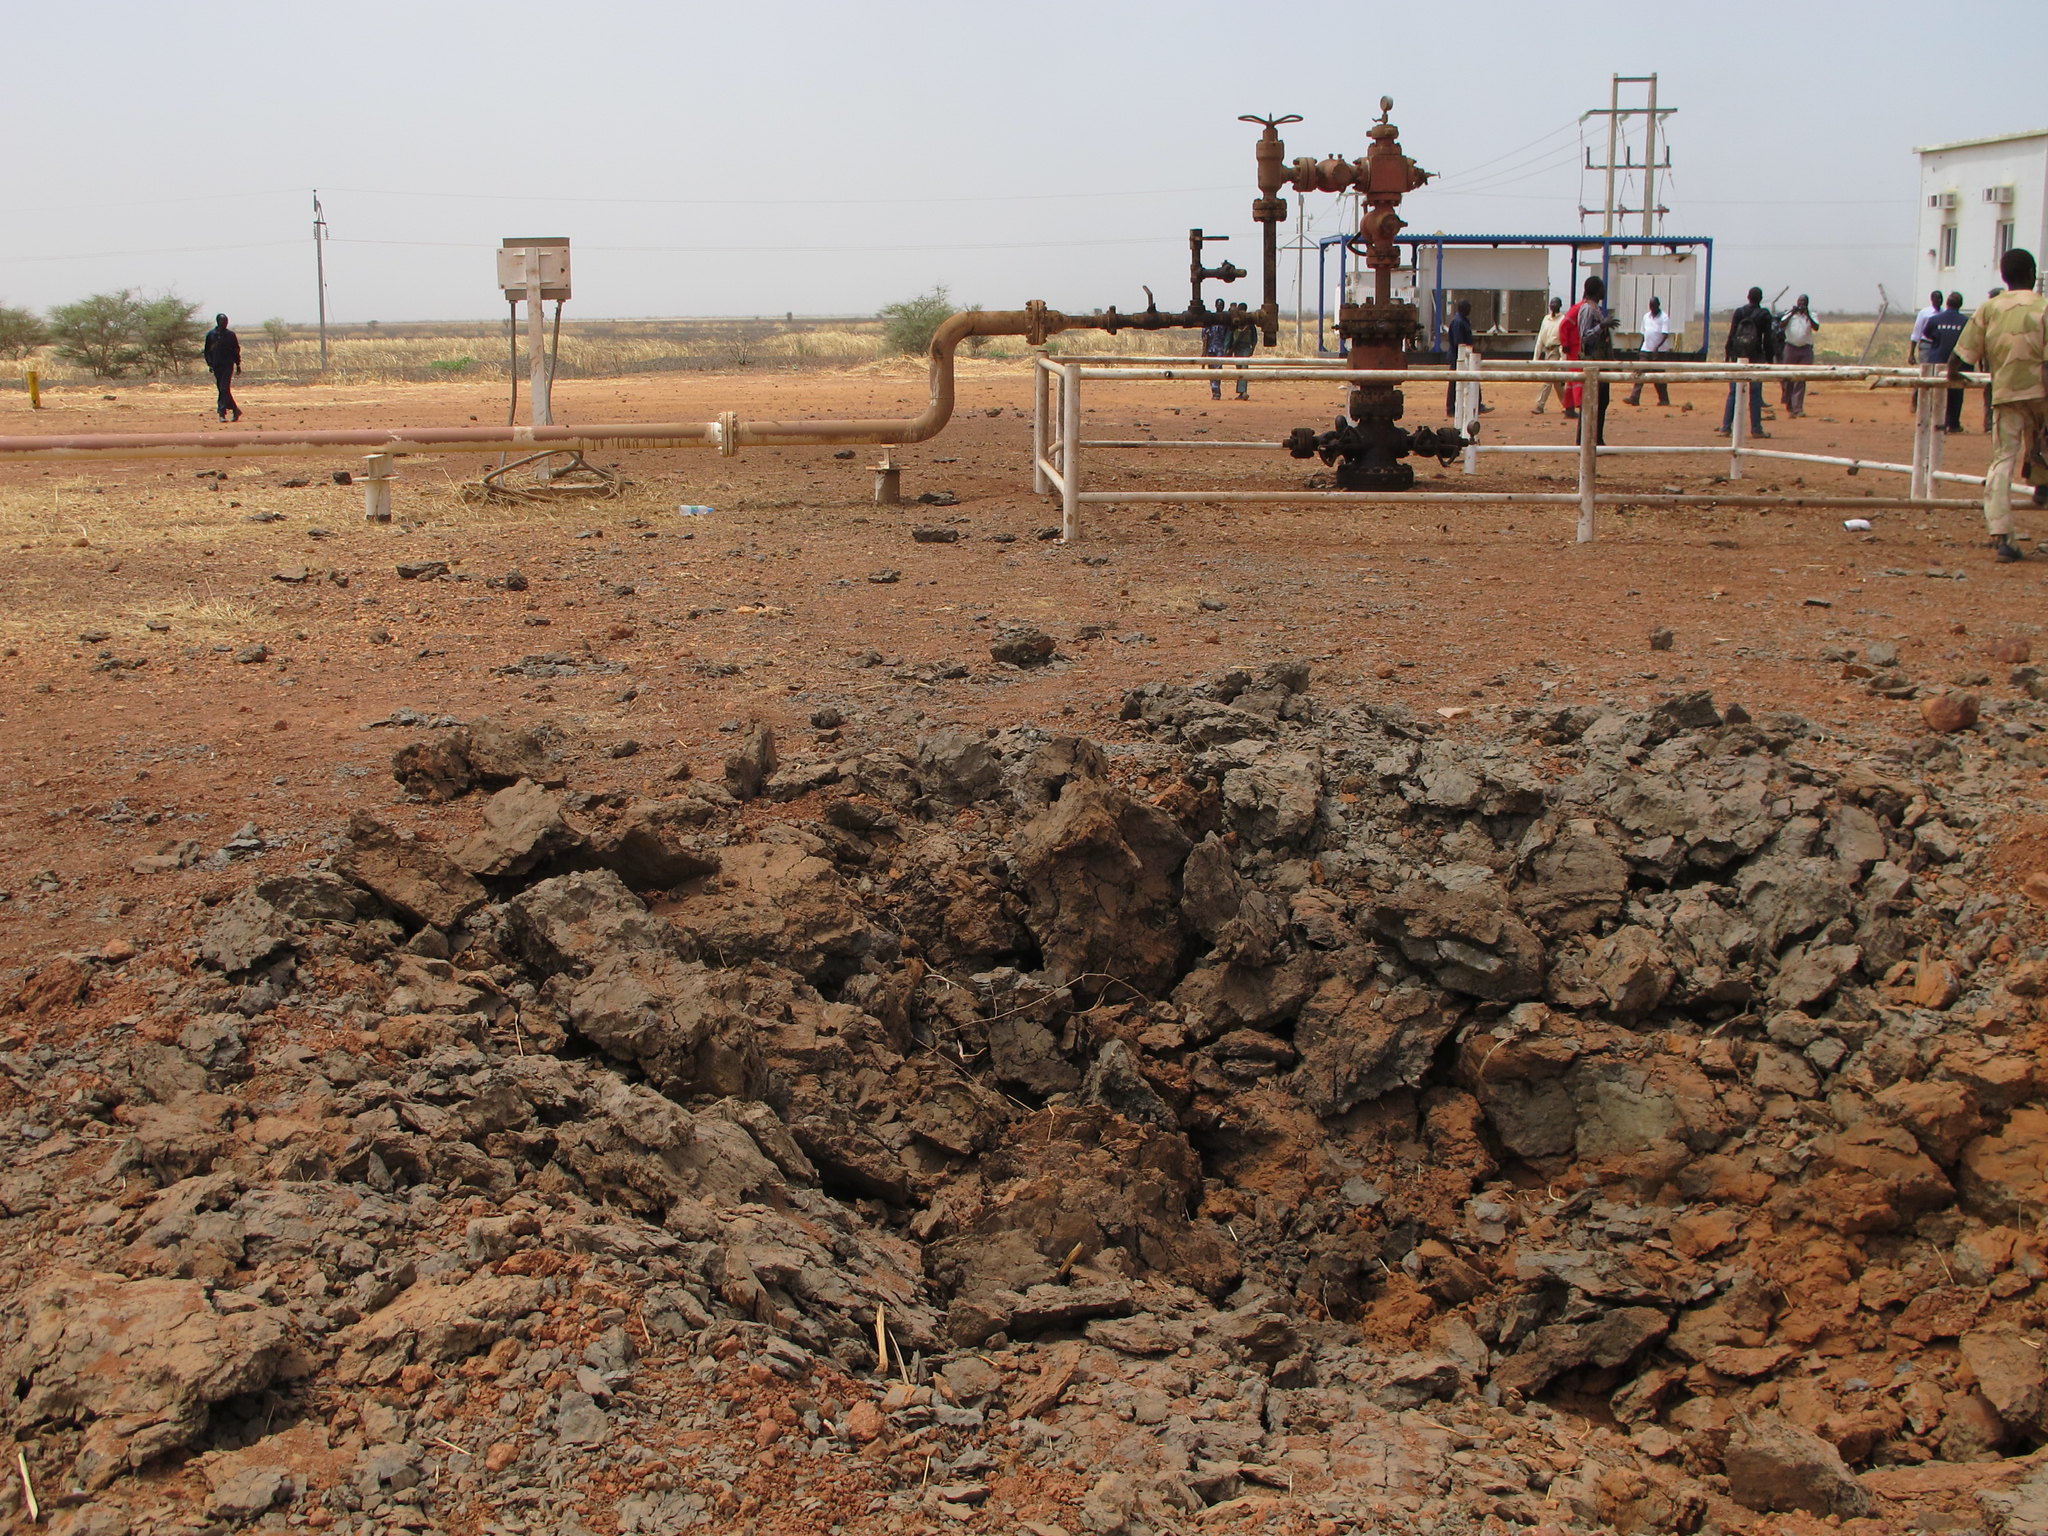 A bomb crater at El Nar oil well 8 in South Sudan. 